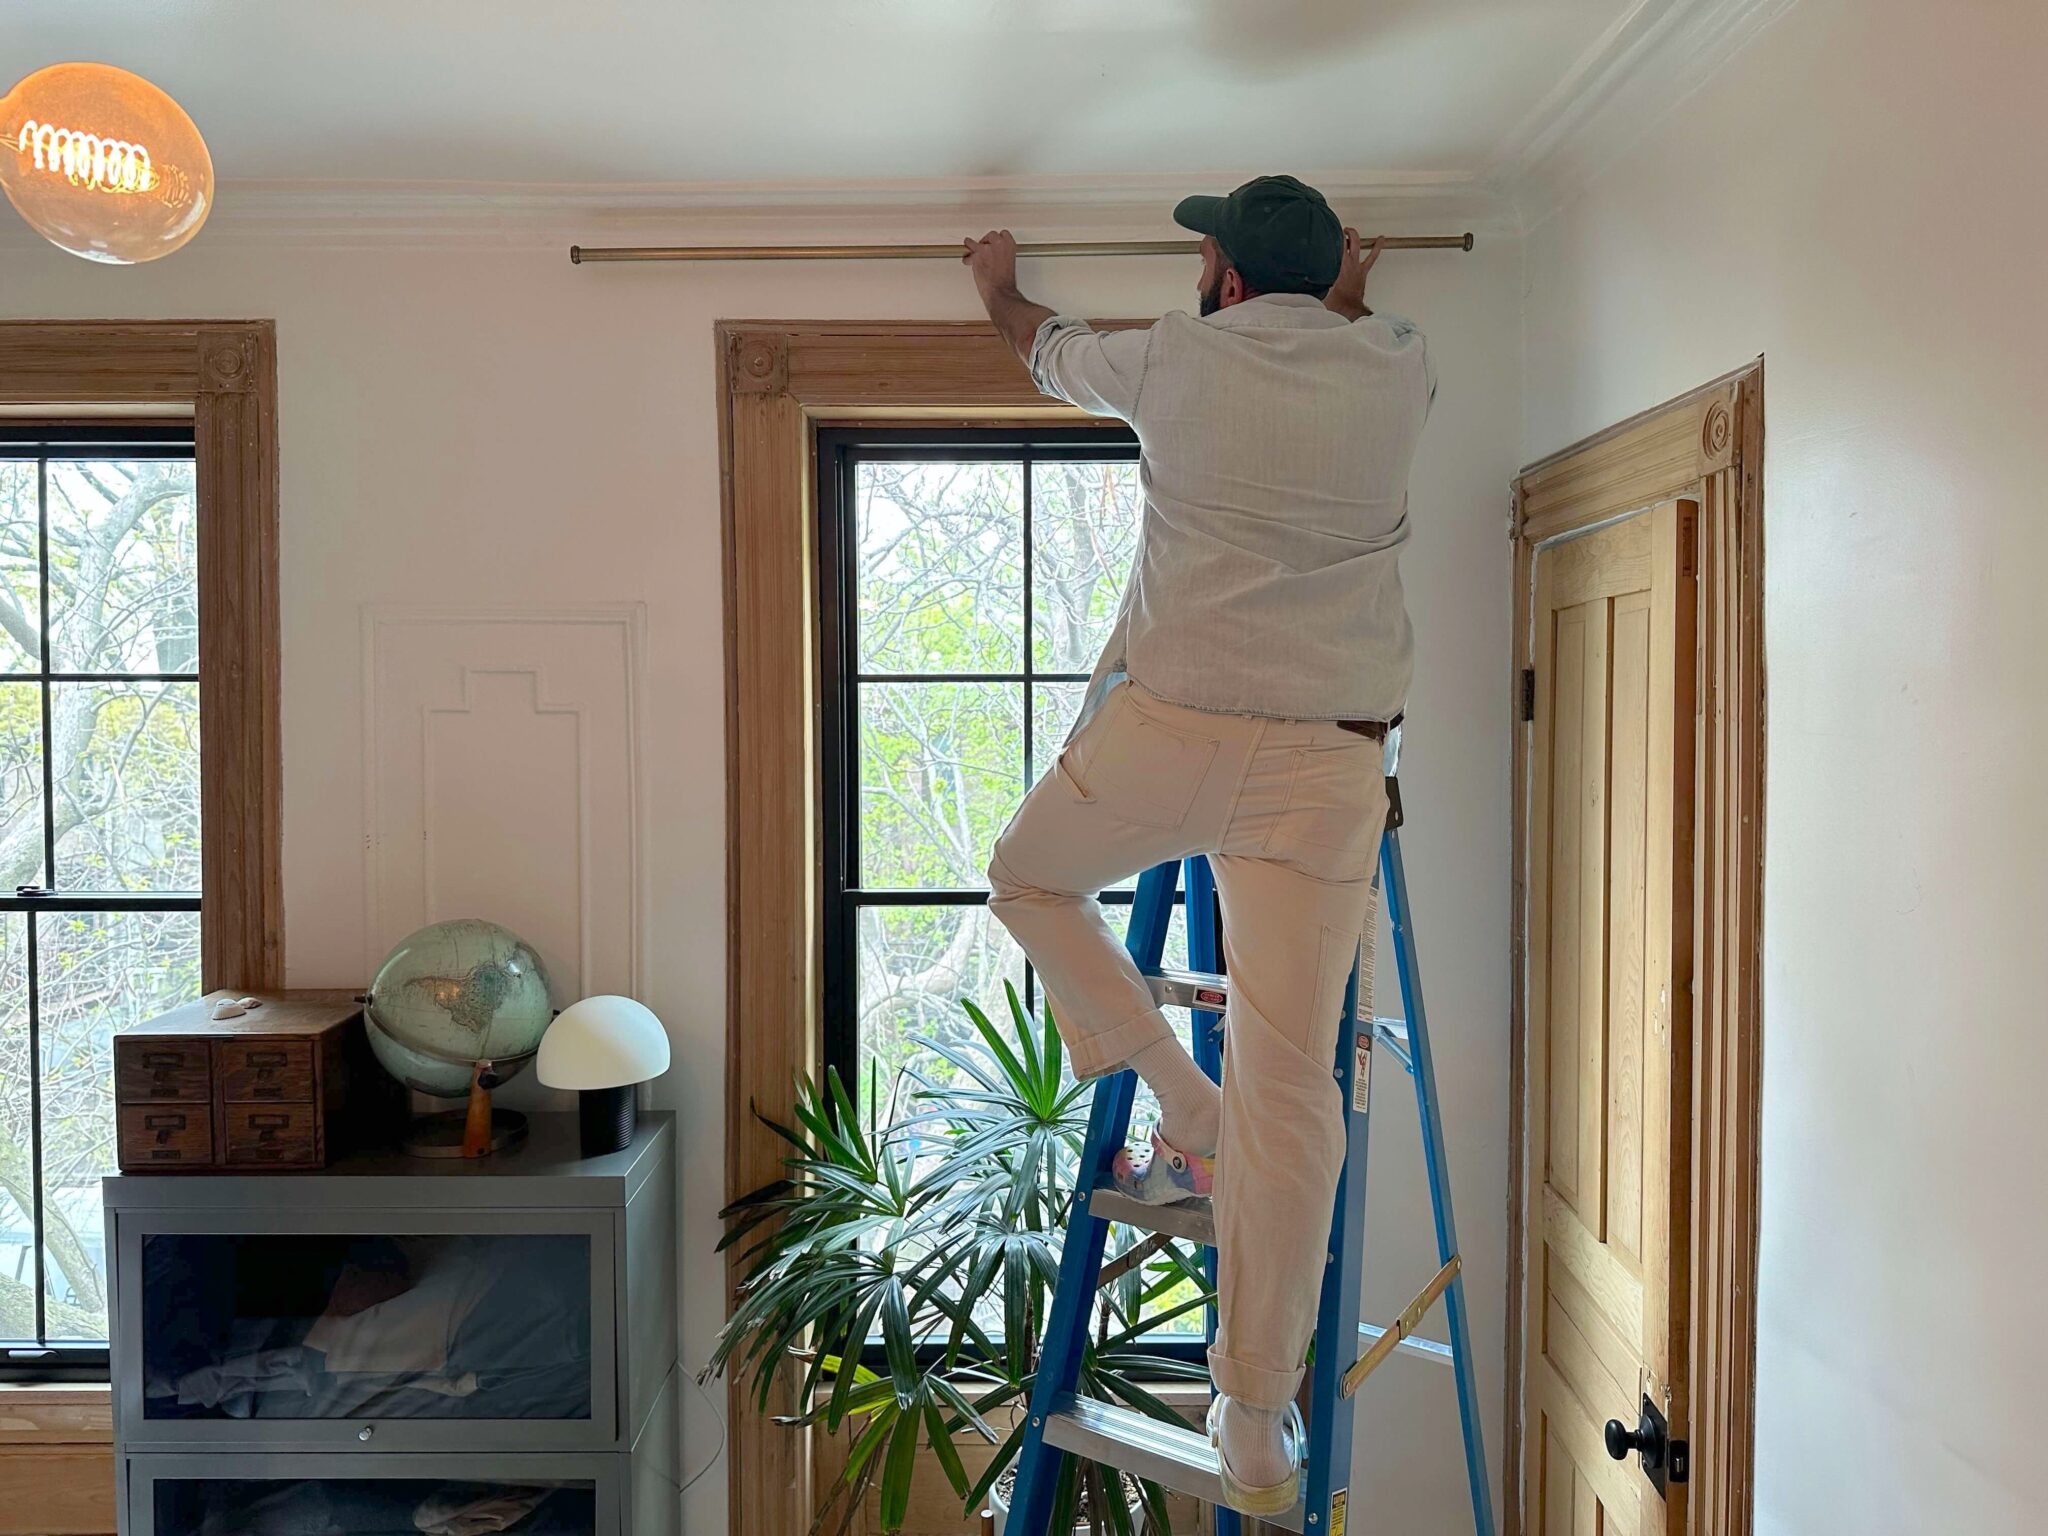 A man installs a metal curtain rod above a window with brown wooden molding. He is standing on a ladder.